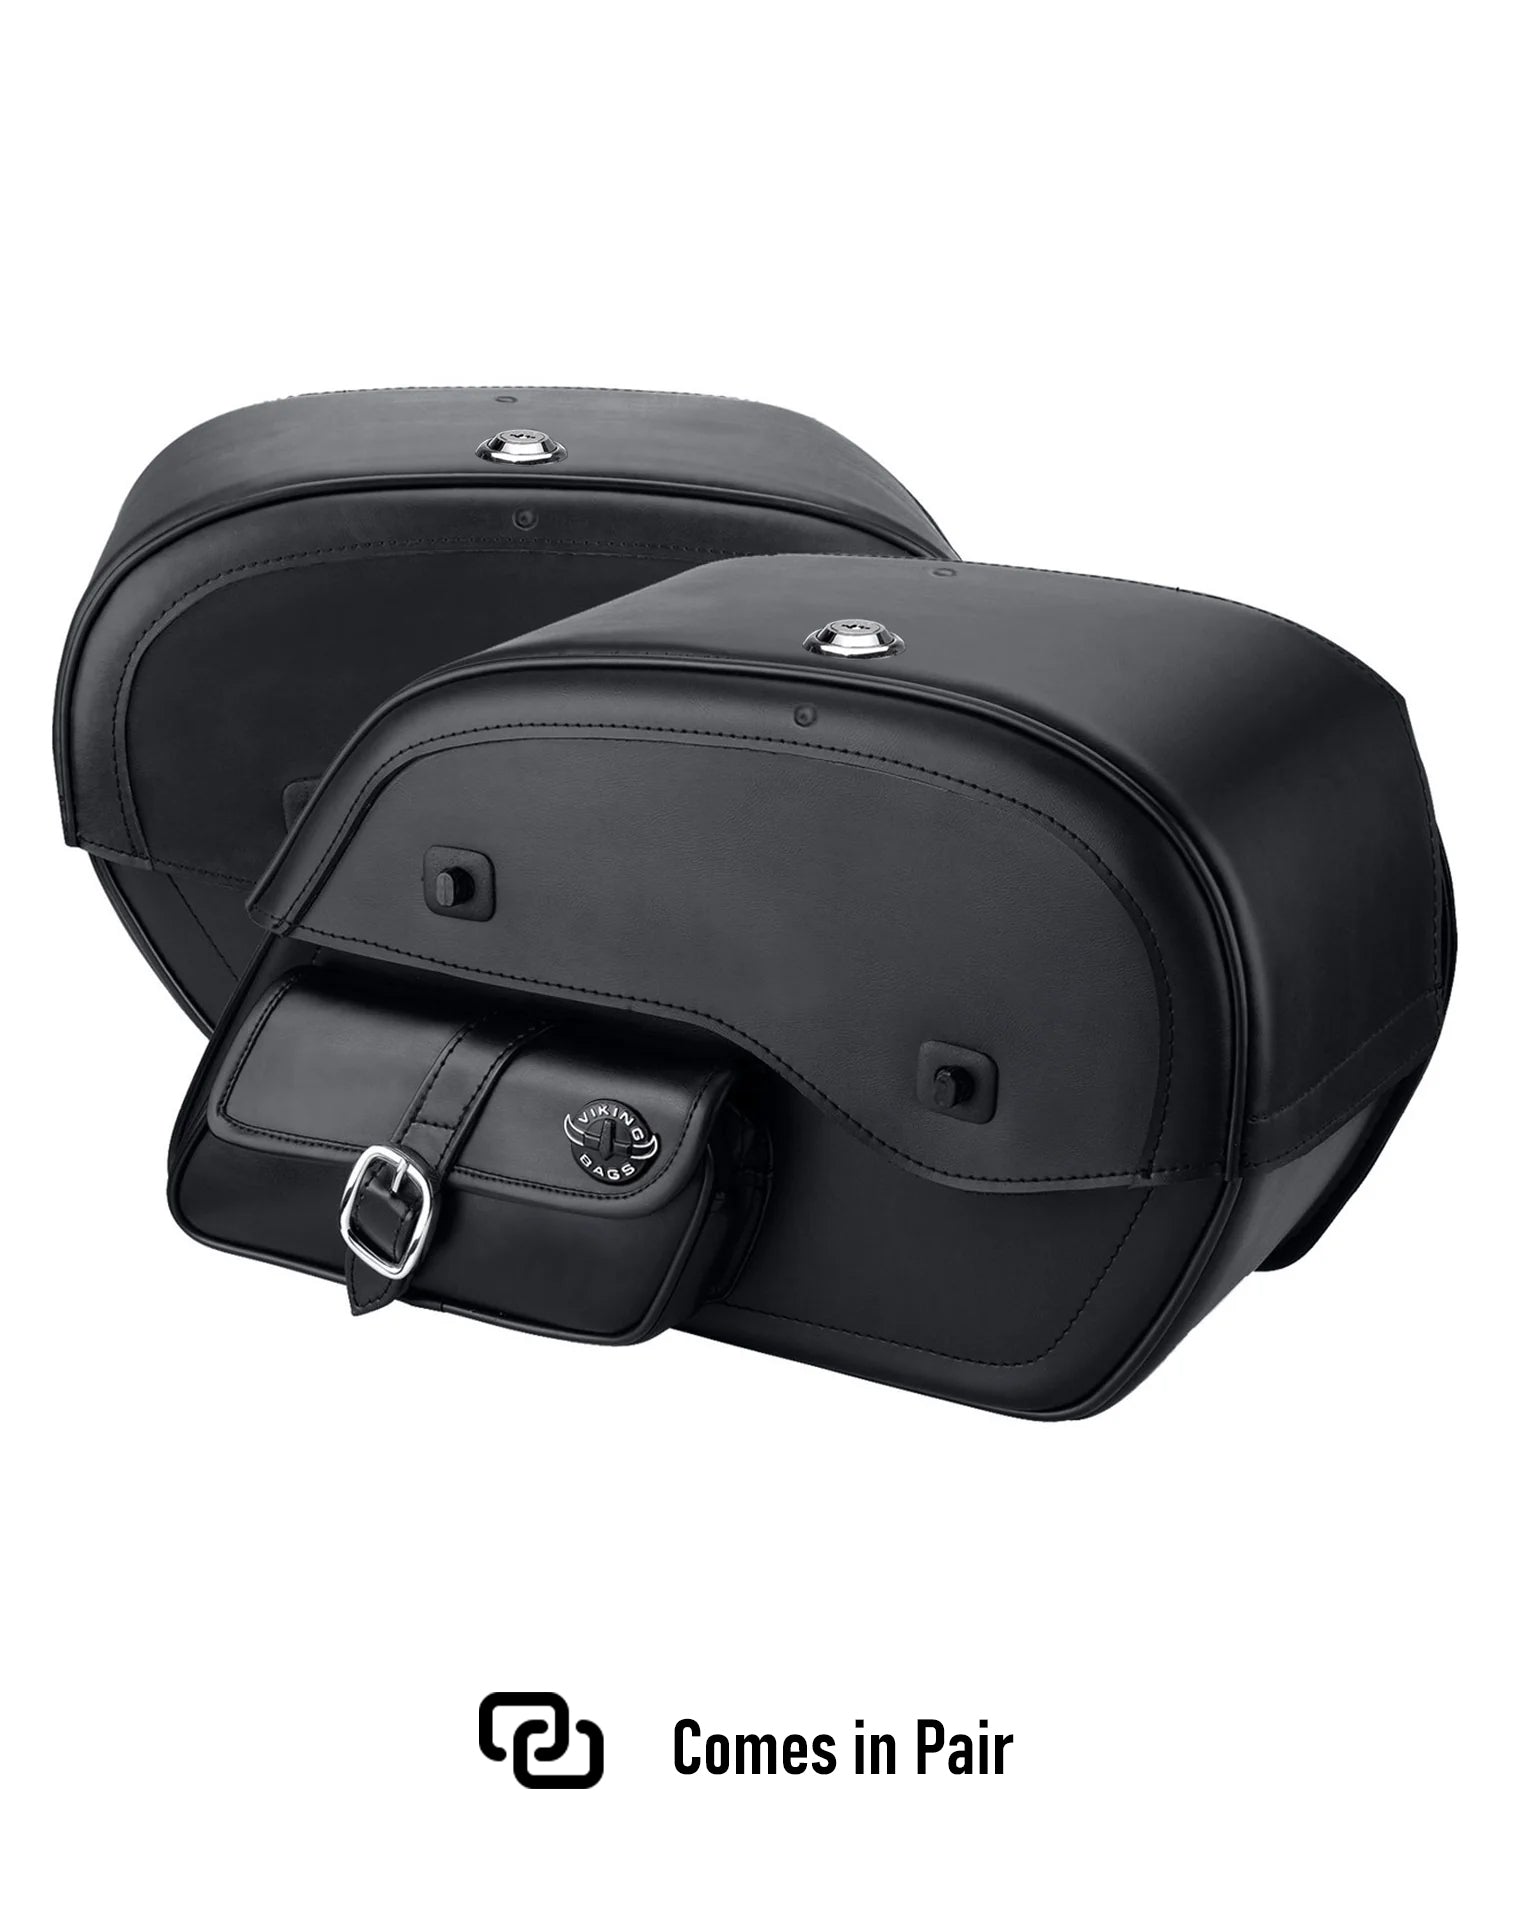 Viking Essential Side Pocket Large Hyosung Aquila Gv 250 Leather Motorcycle Saddlebags Weather Resistant Bags Comes in Pair